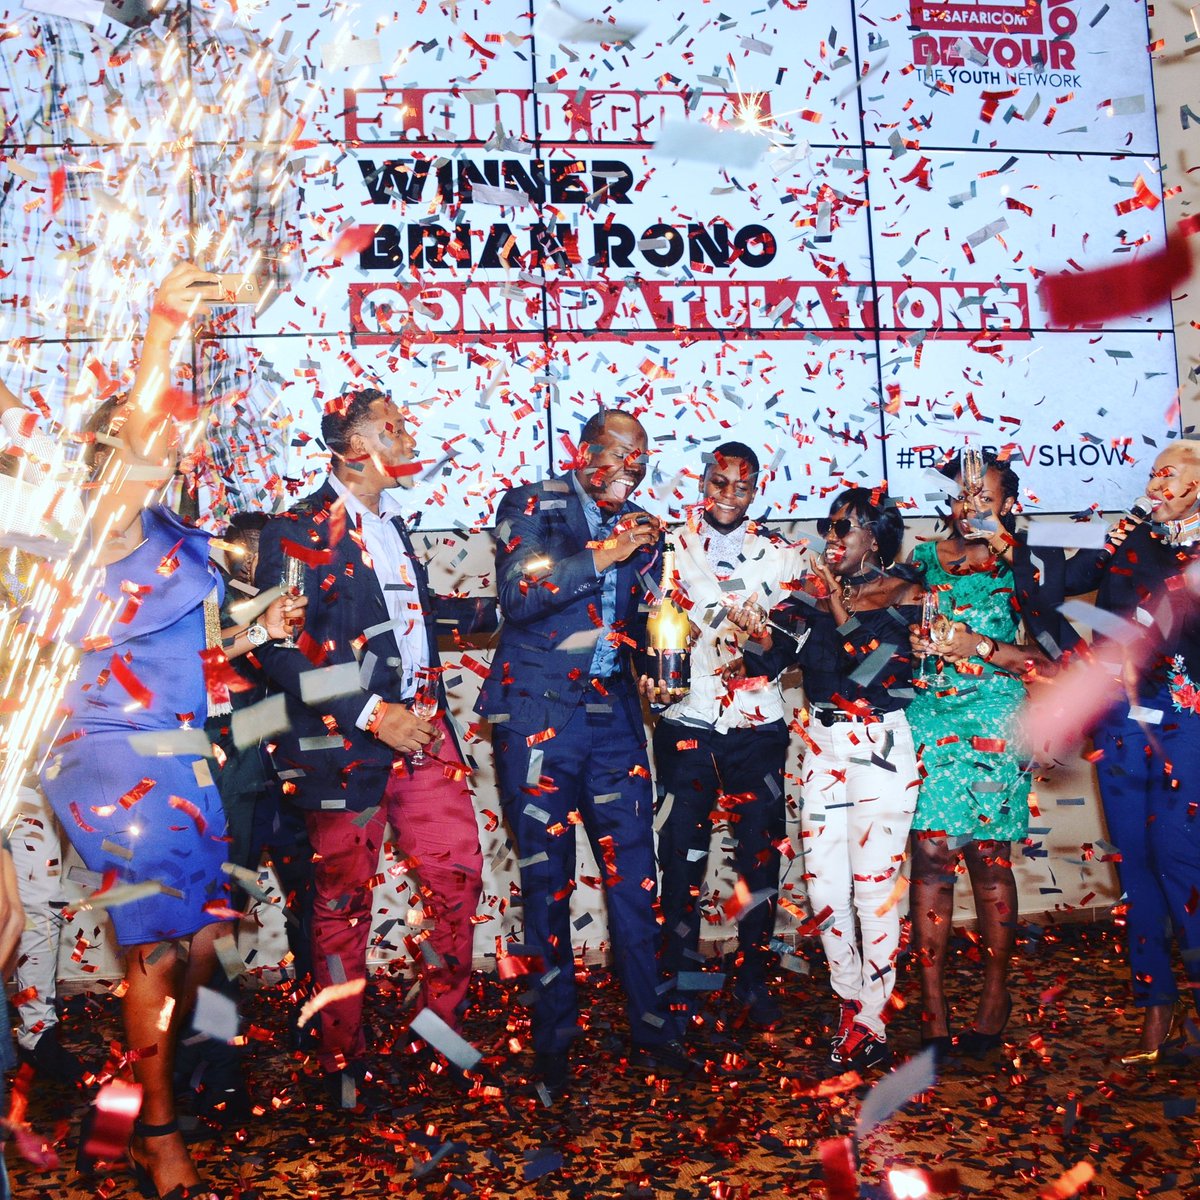 We started with over 1,000 young hopefull entrepreneurs,  across 6 regions, 12 were shortlisted, three remained standing and Brian Rono aka waru guy emerged as the BOSS.

#BYOBTVshow #blazekenya #experientialmarketing #marketing #eventplanner #event  #gamechangermarketing